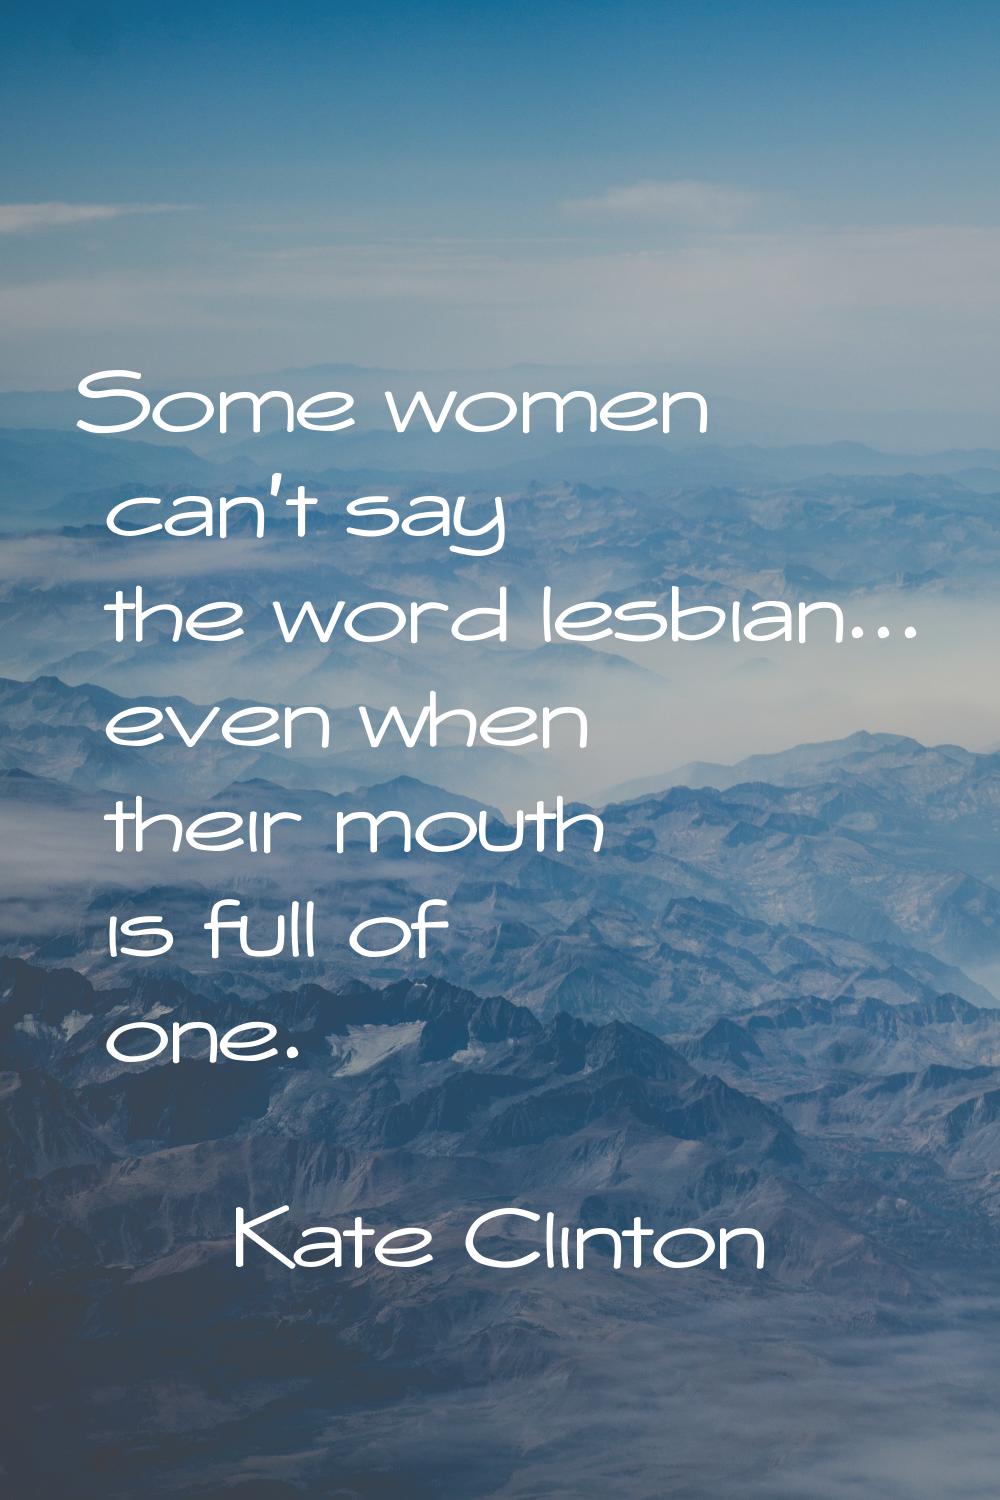 Some women can't say the word lesbian... even when their mouth is full of one.